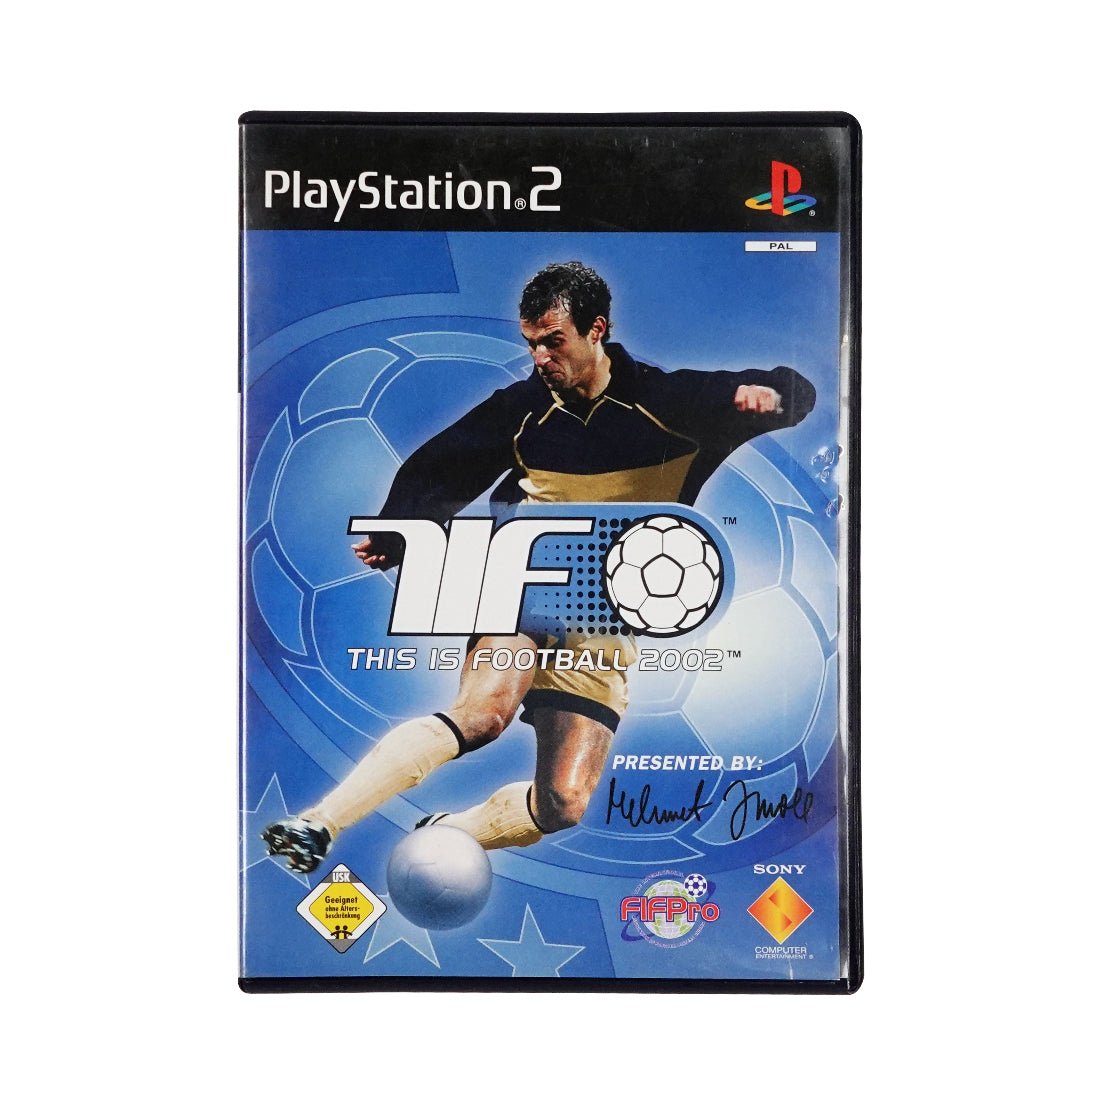 (Pre-Owned) This is Football 2002 - PlayStation 2 - Store 974 | ستور ٩٧٤